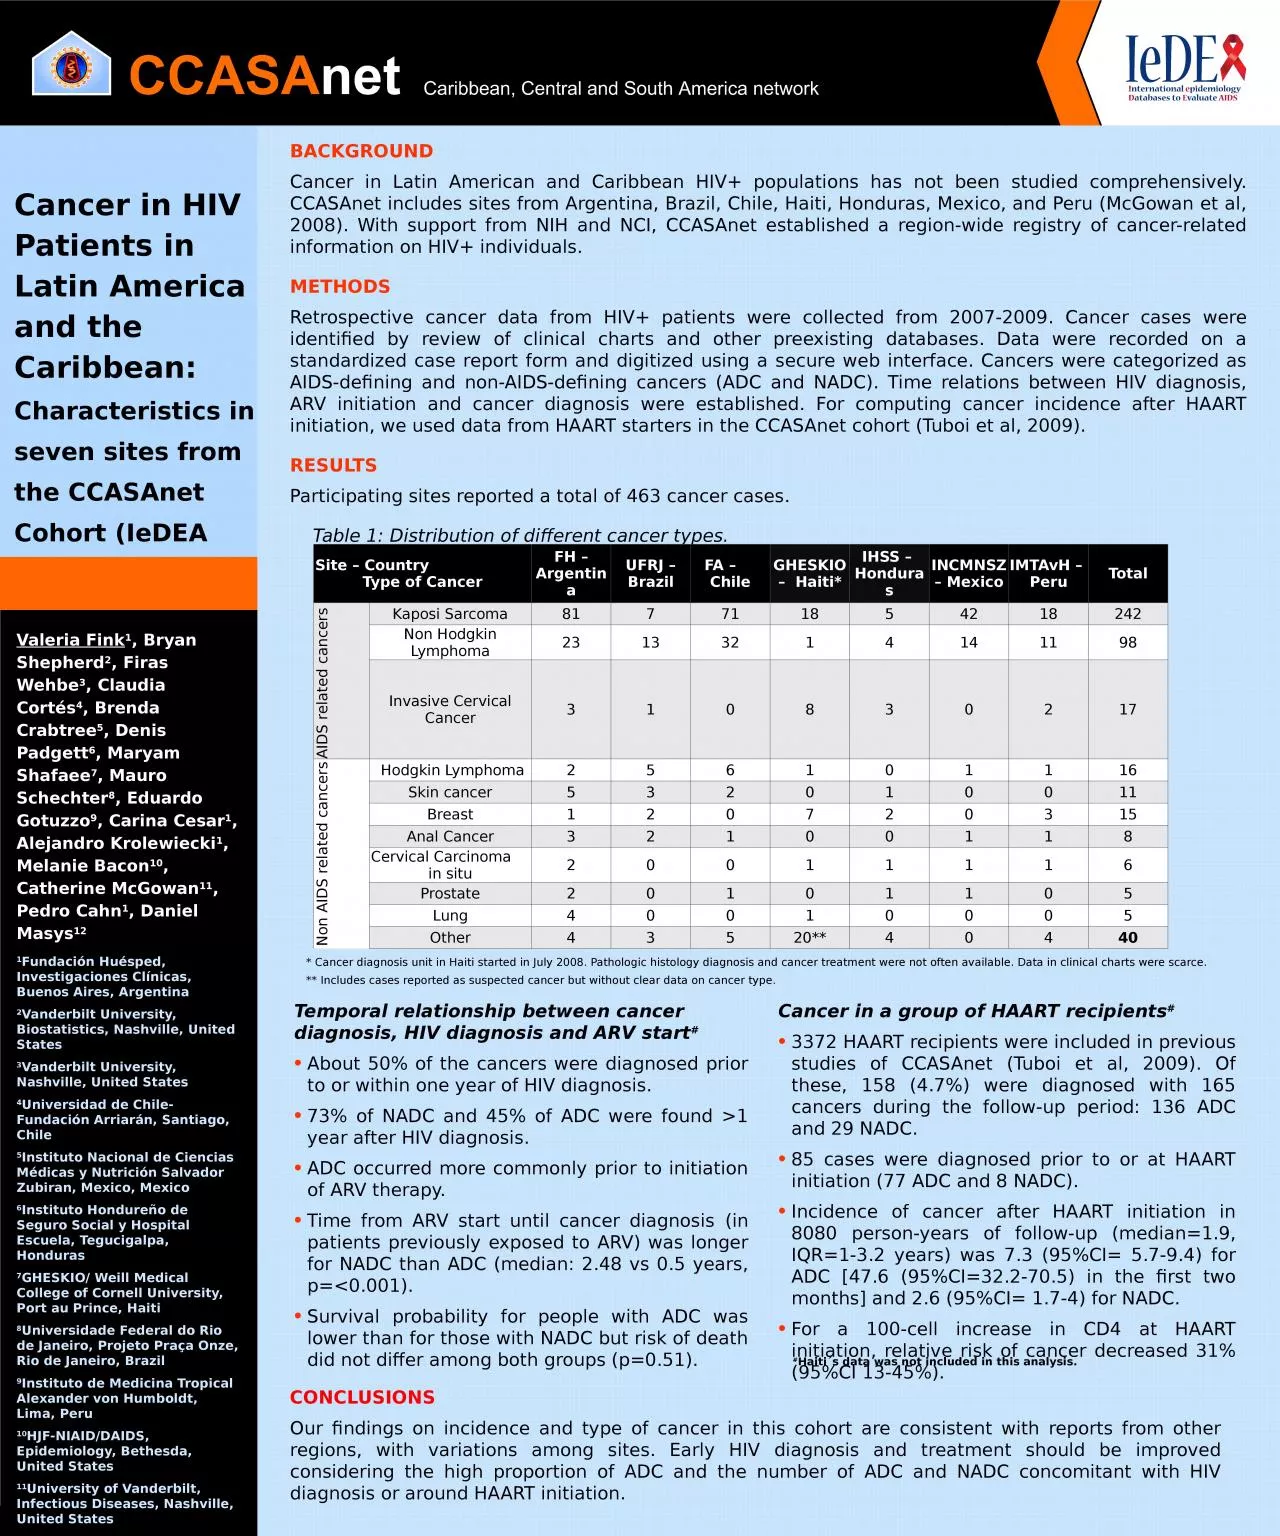 Cancer in HIV Patients in Latin America and the Caribbean: